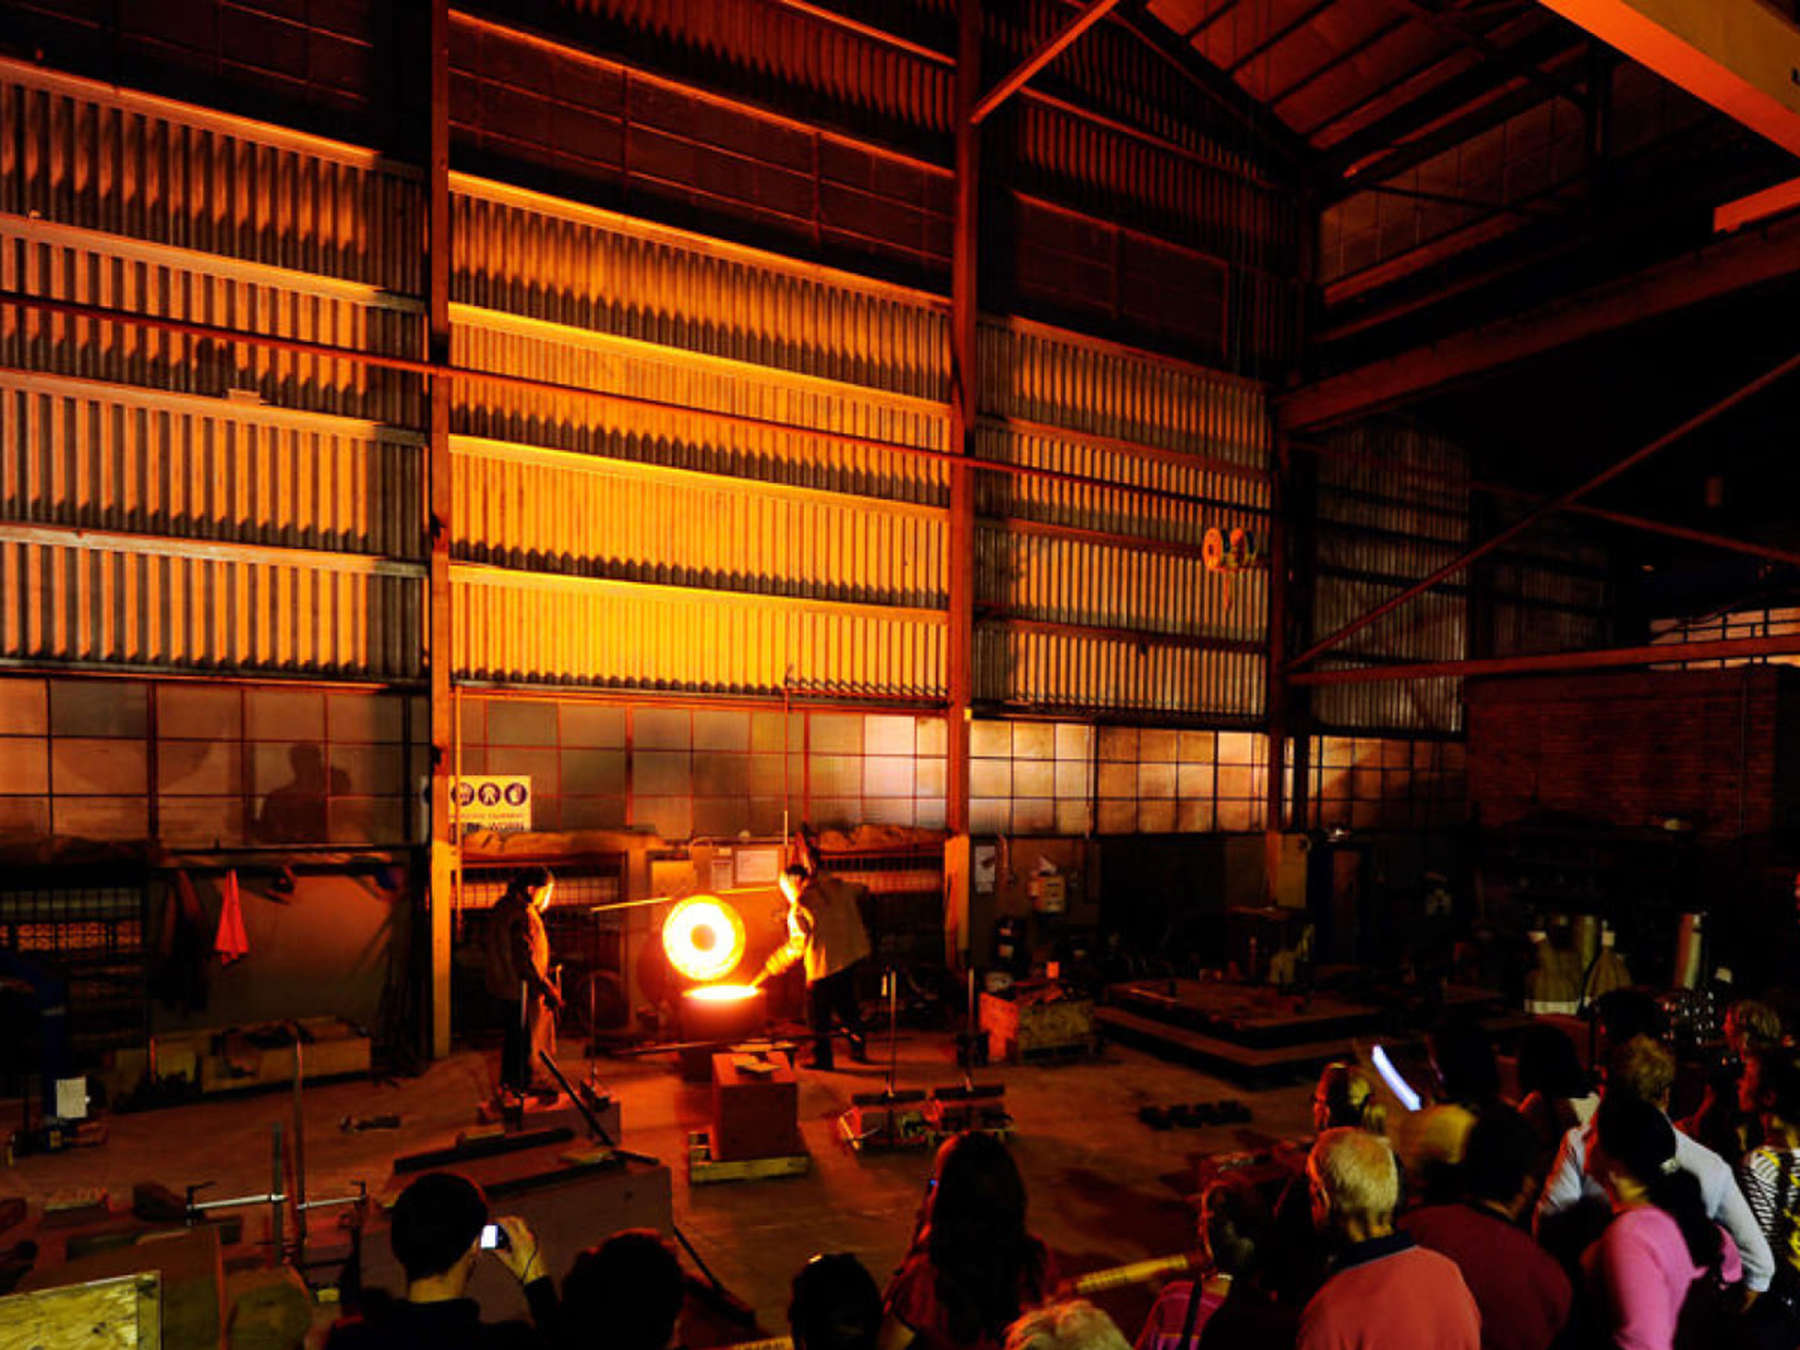 A public event showcasing UAP's foundry and the making of art.